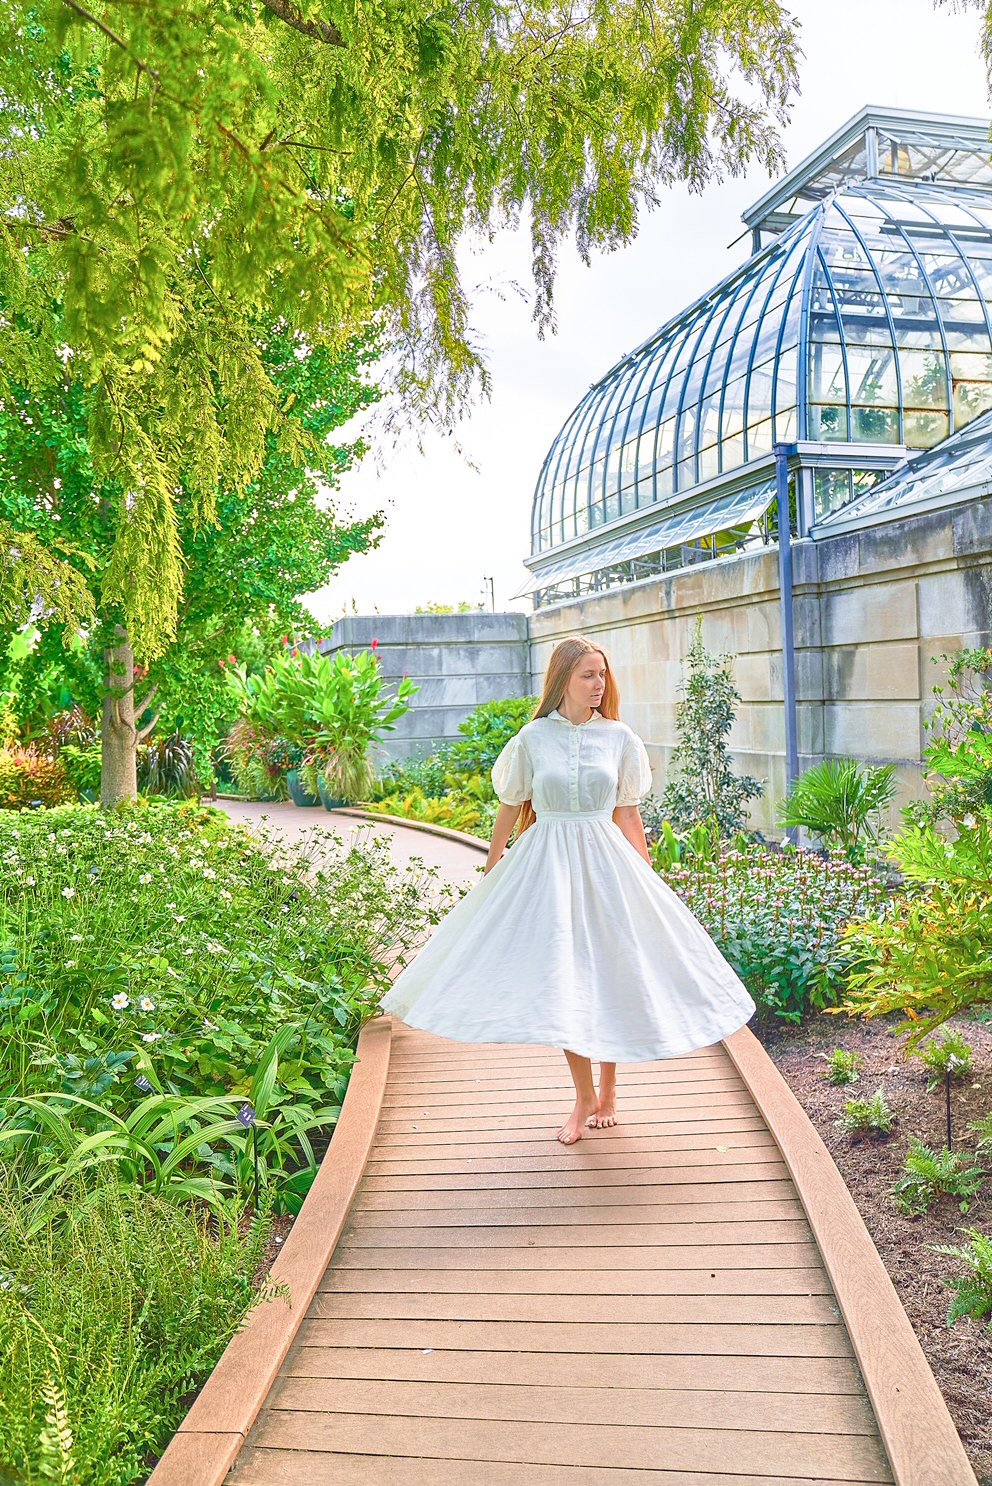 A woman in a white dress with long hair  facing the camera standing on a wooden walkway in the United States Botanical Gardens, one of the best things to do during a weekend in Washington DC. She is surrounded by plants with white and pale pink flowers, trees, and behind her is a conservatory building. 